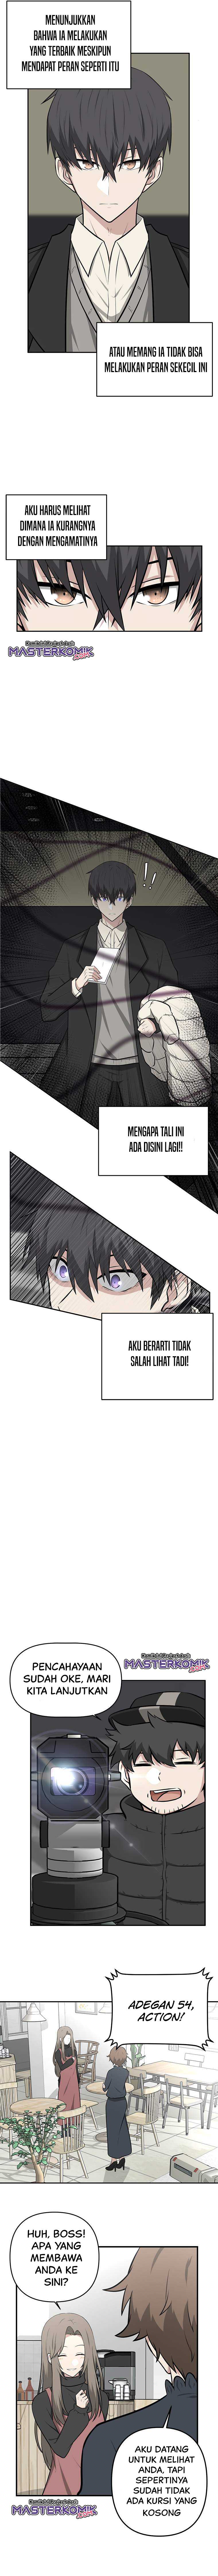 Where Are You Looking, Manager? Chapter 03